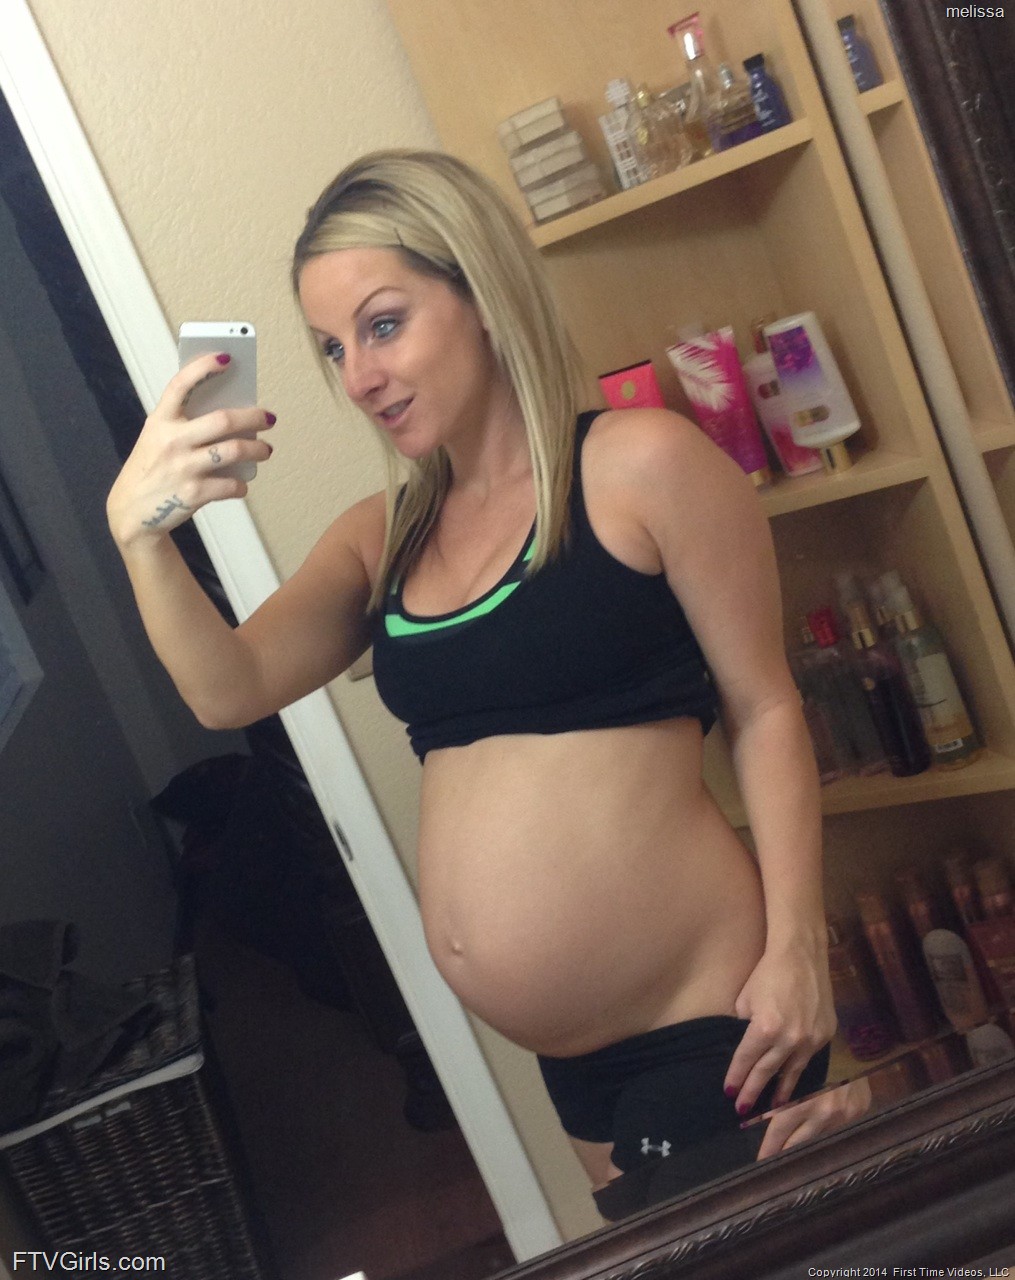 Big boobed pregnant blonde Stacy Cruz taking selfies in the mirror